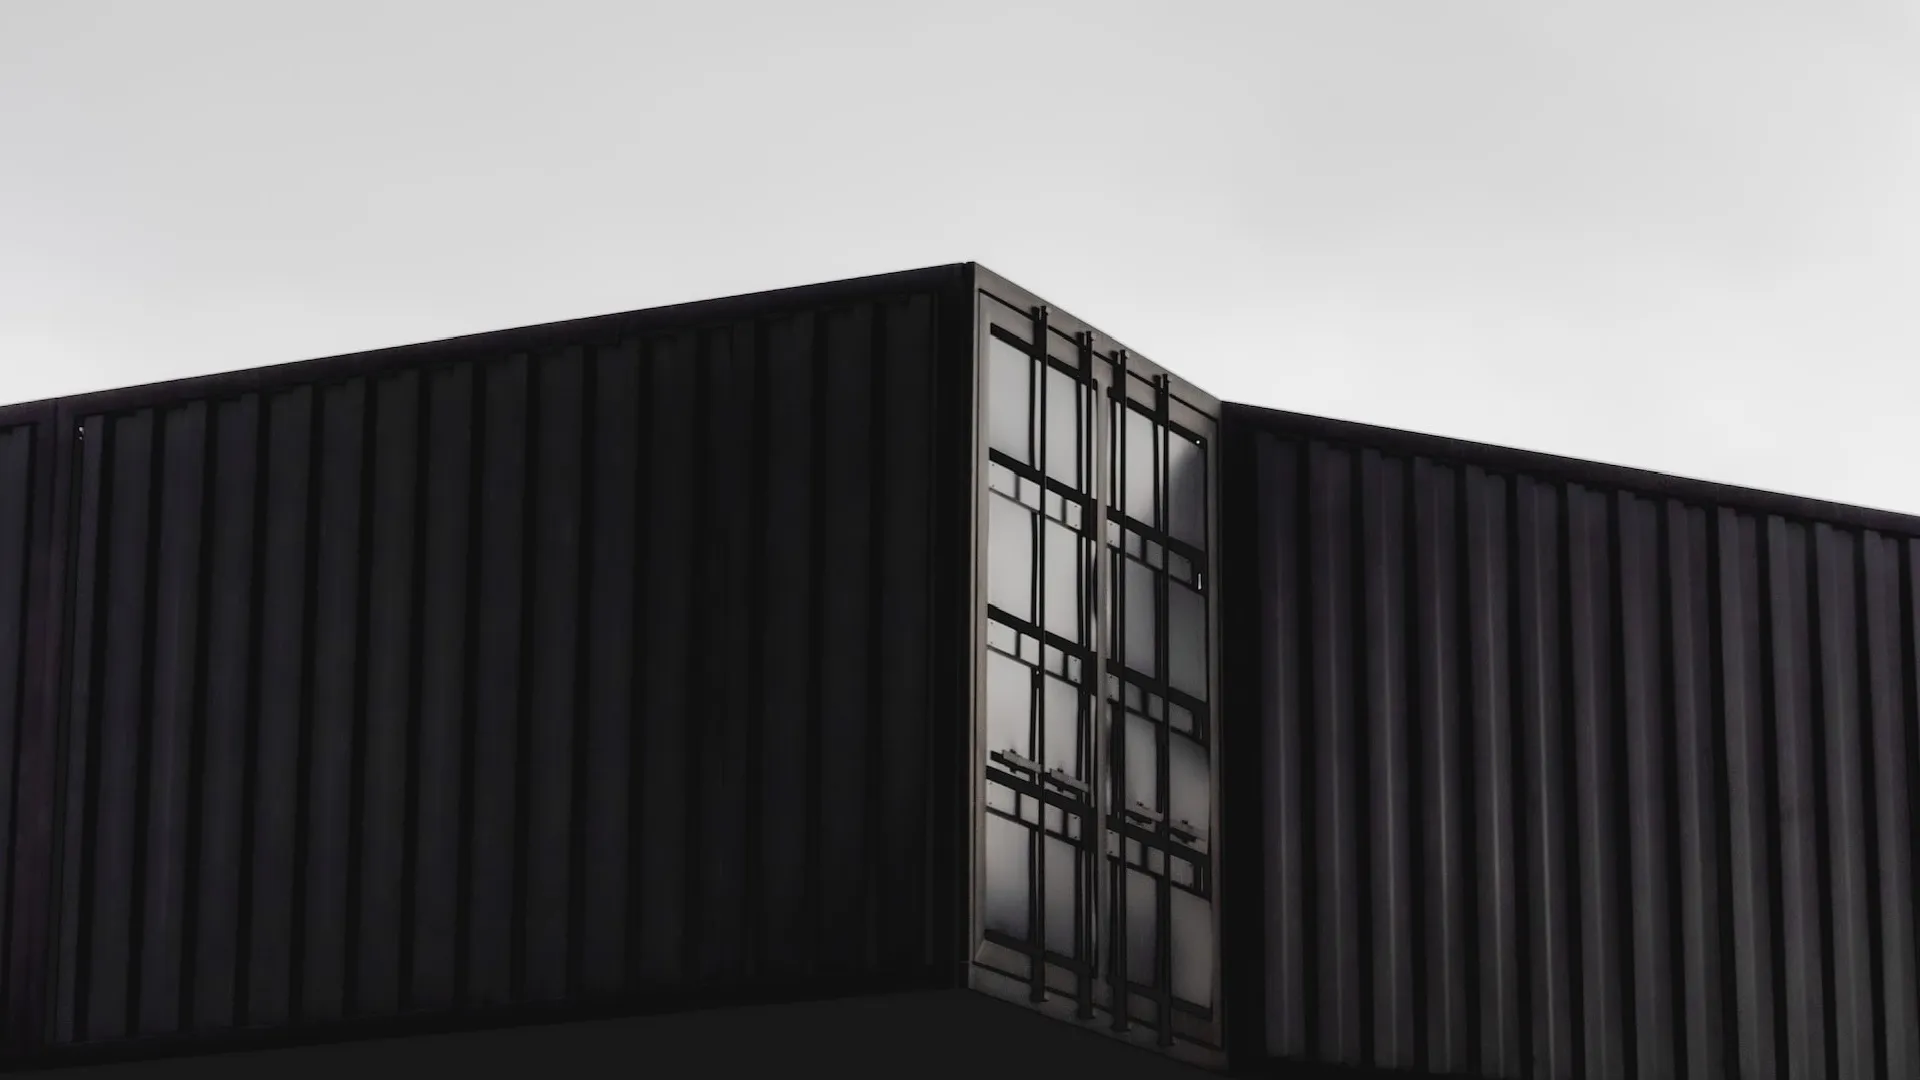 Dark shipping containers